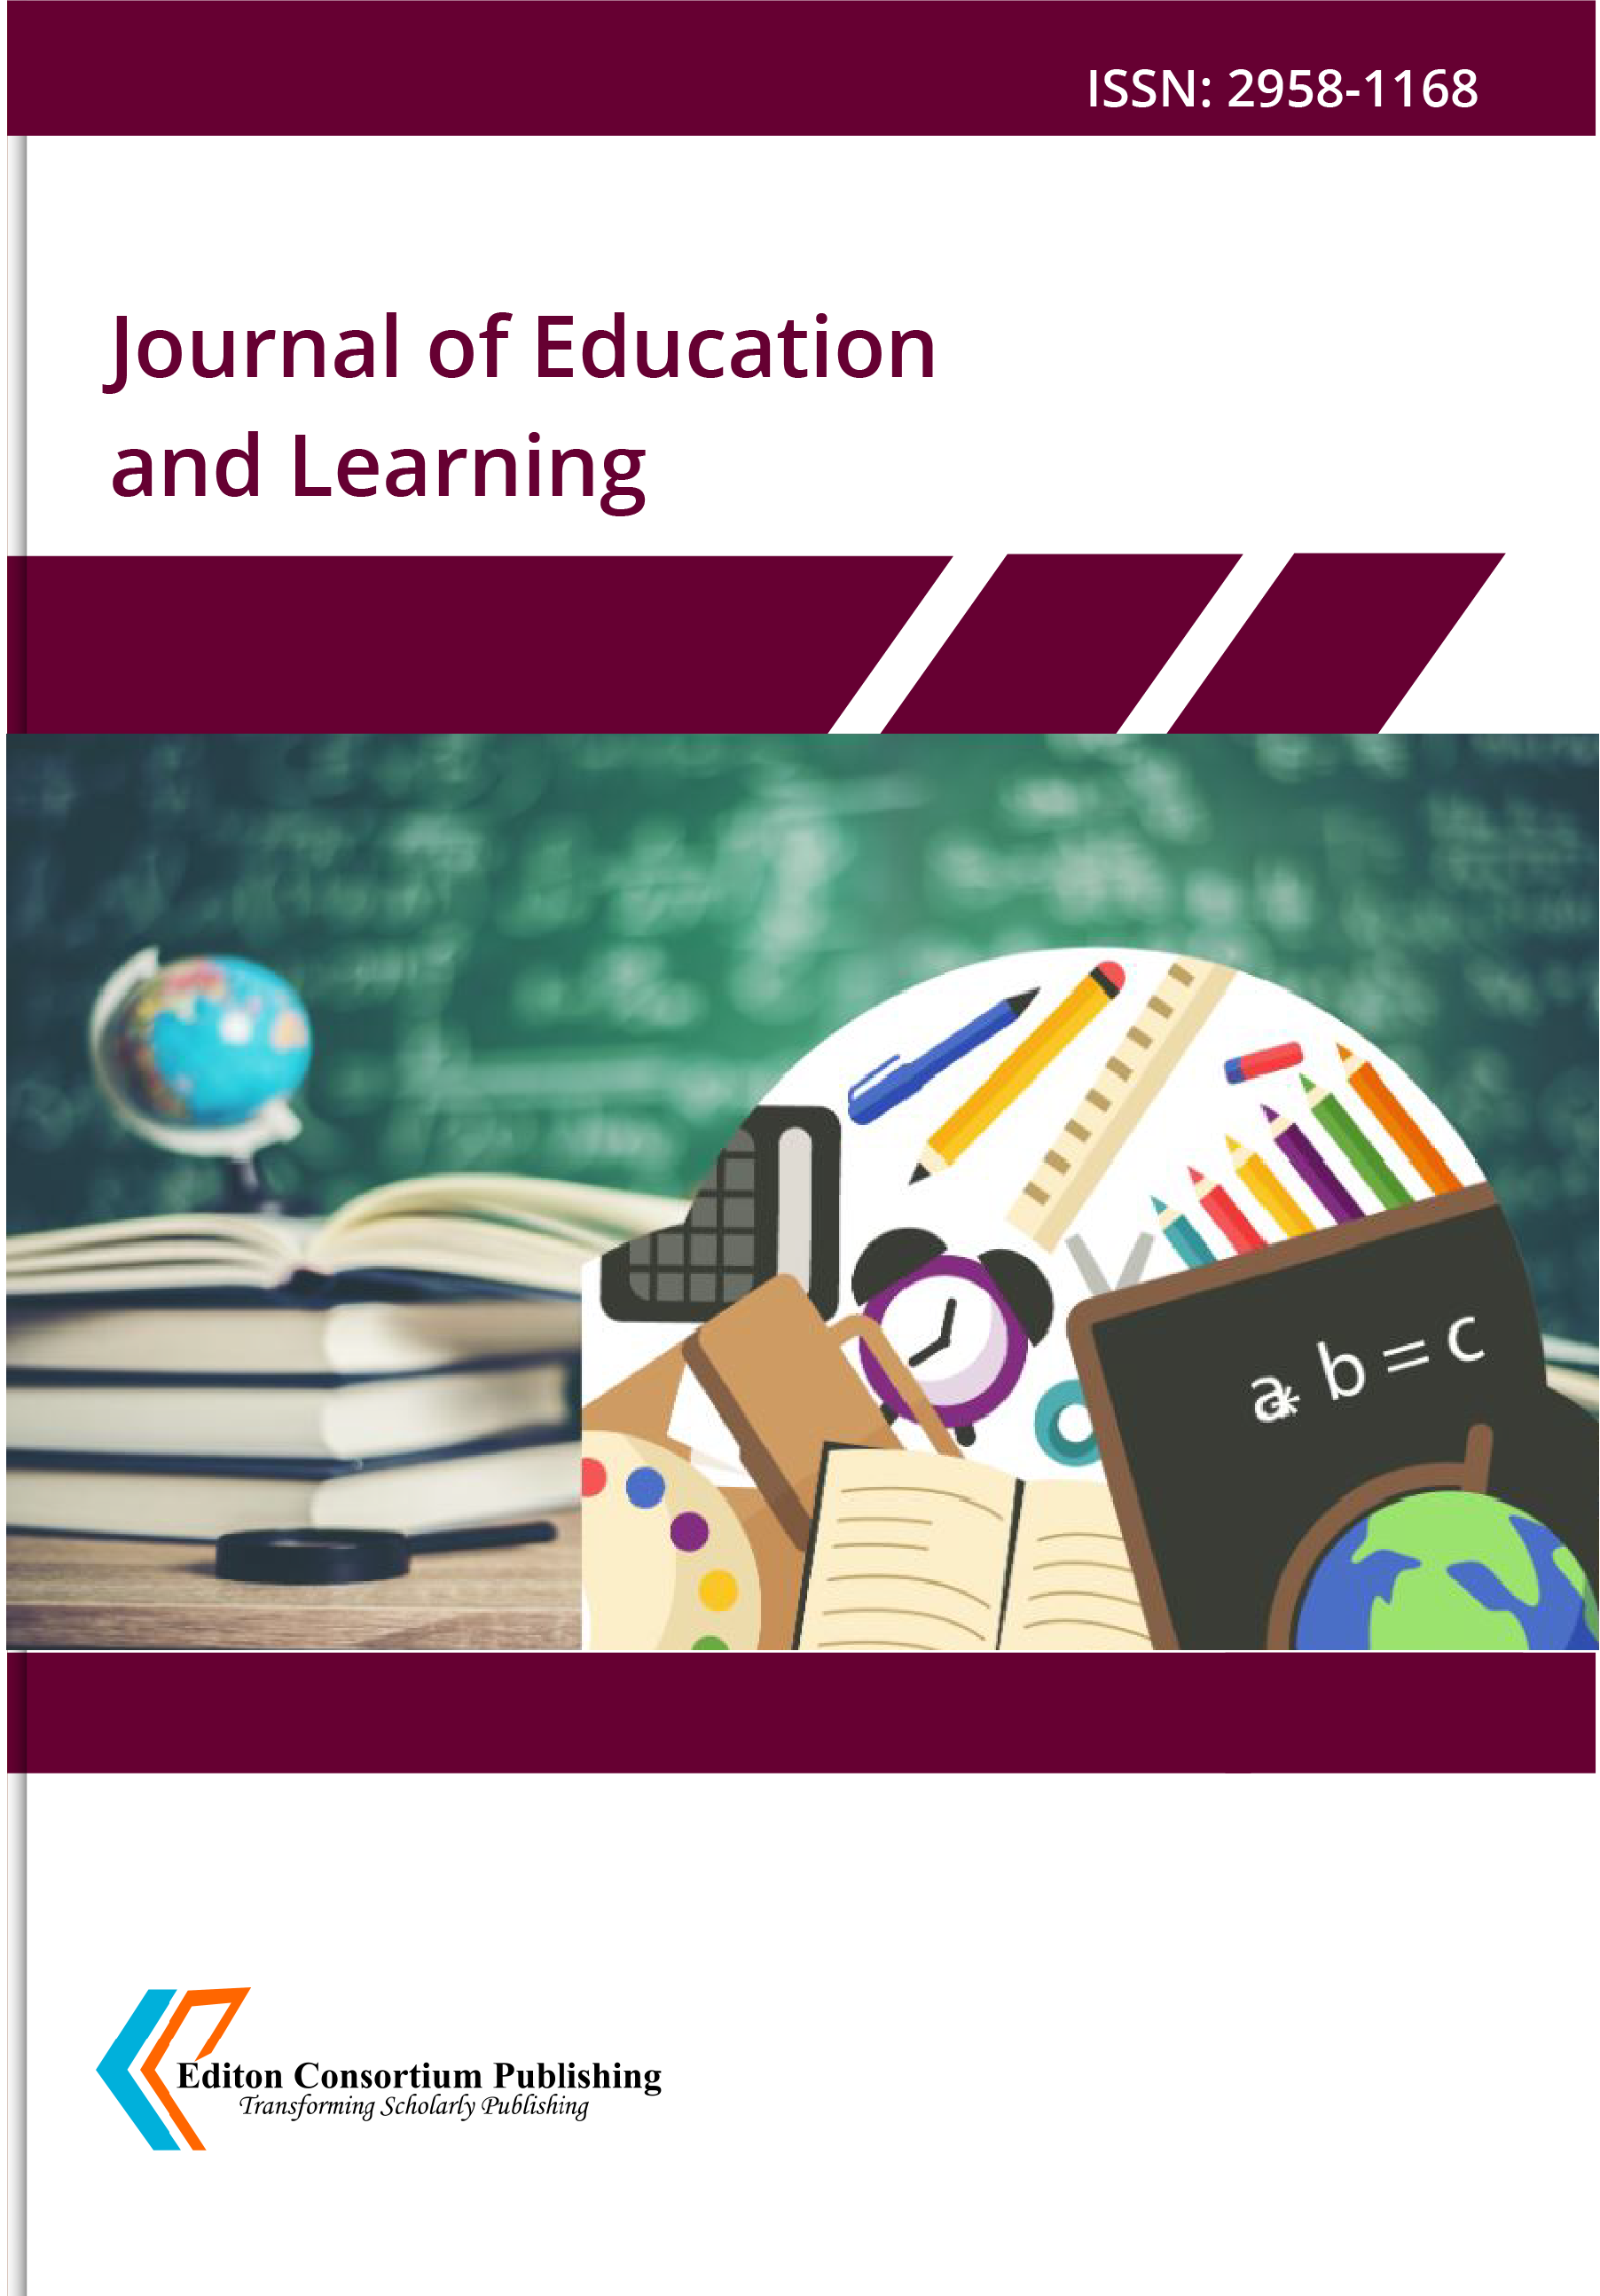  Journal of Education and Learning